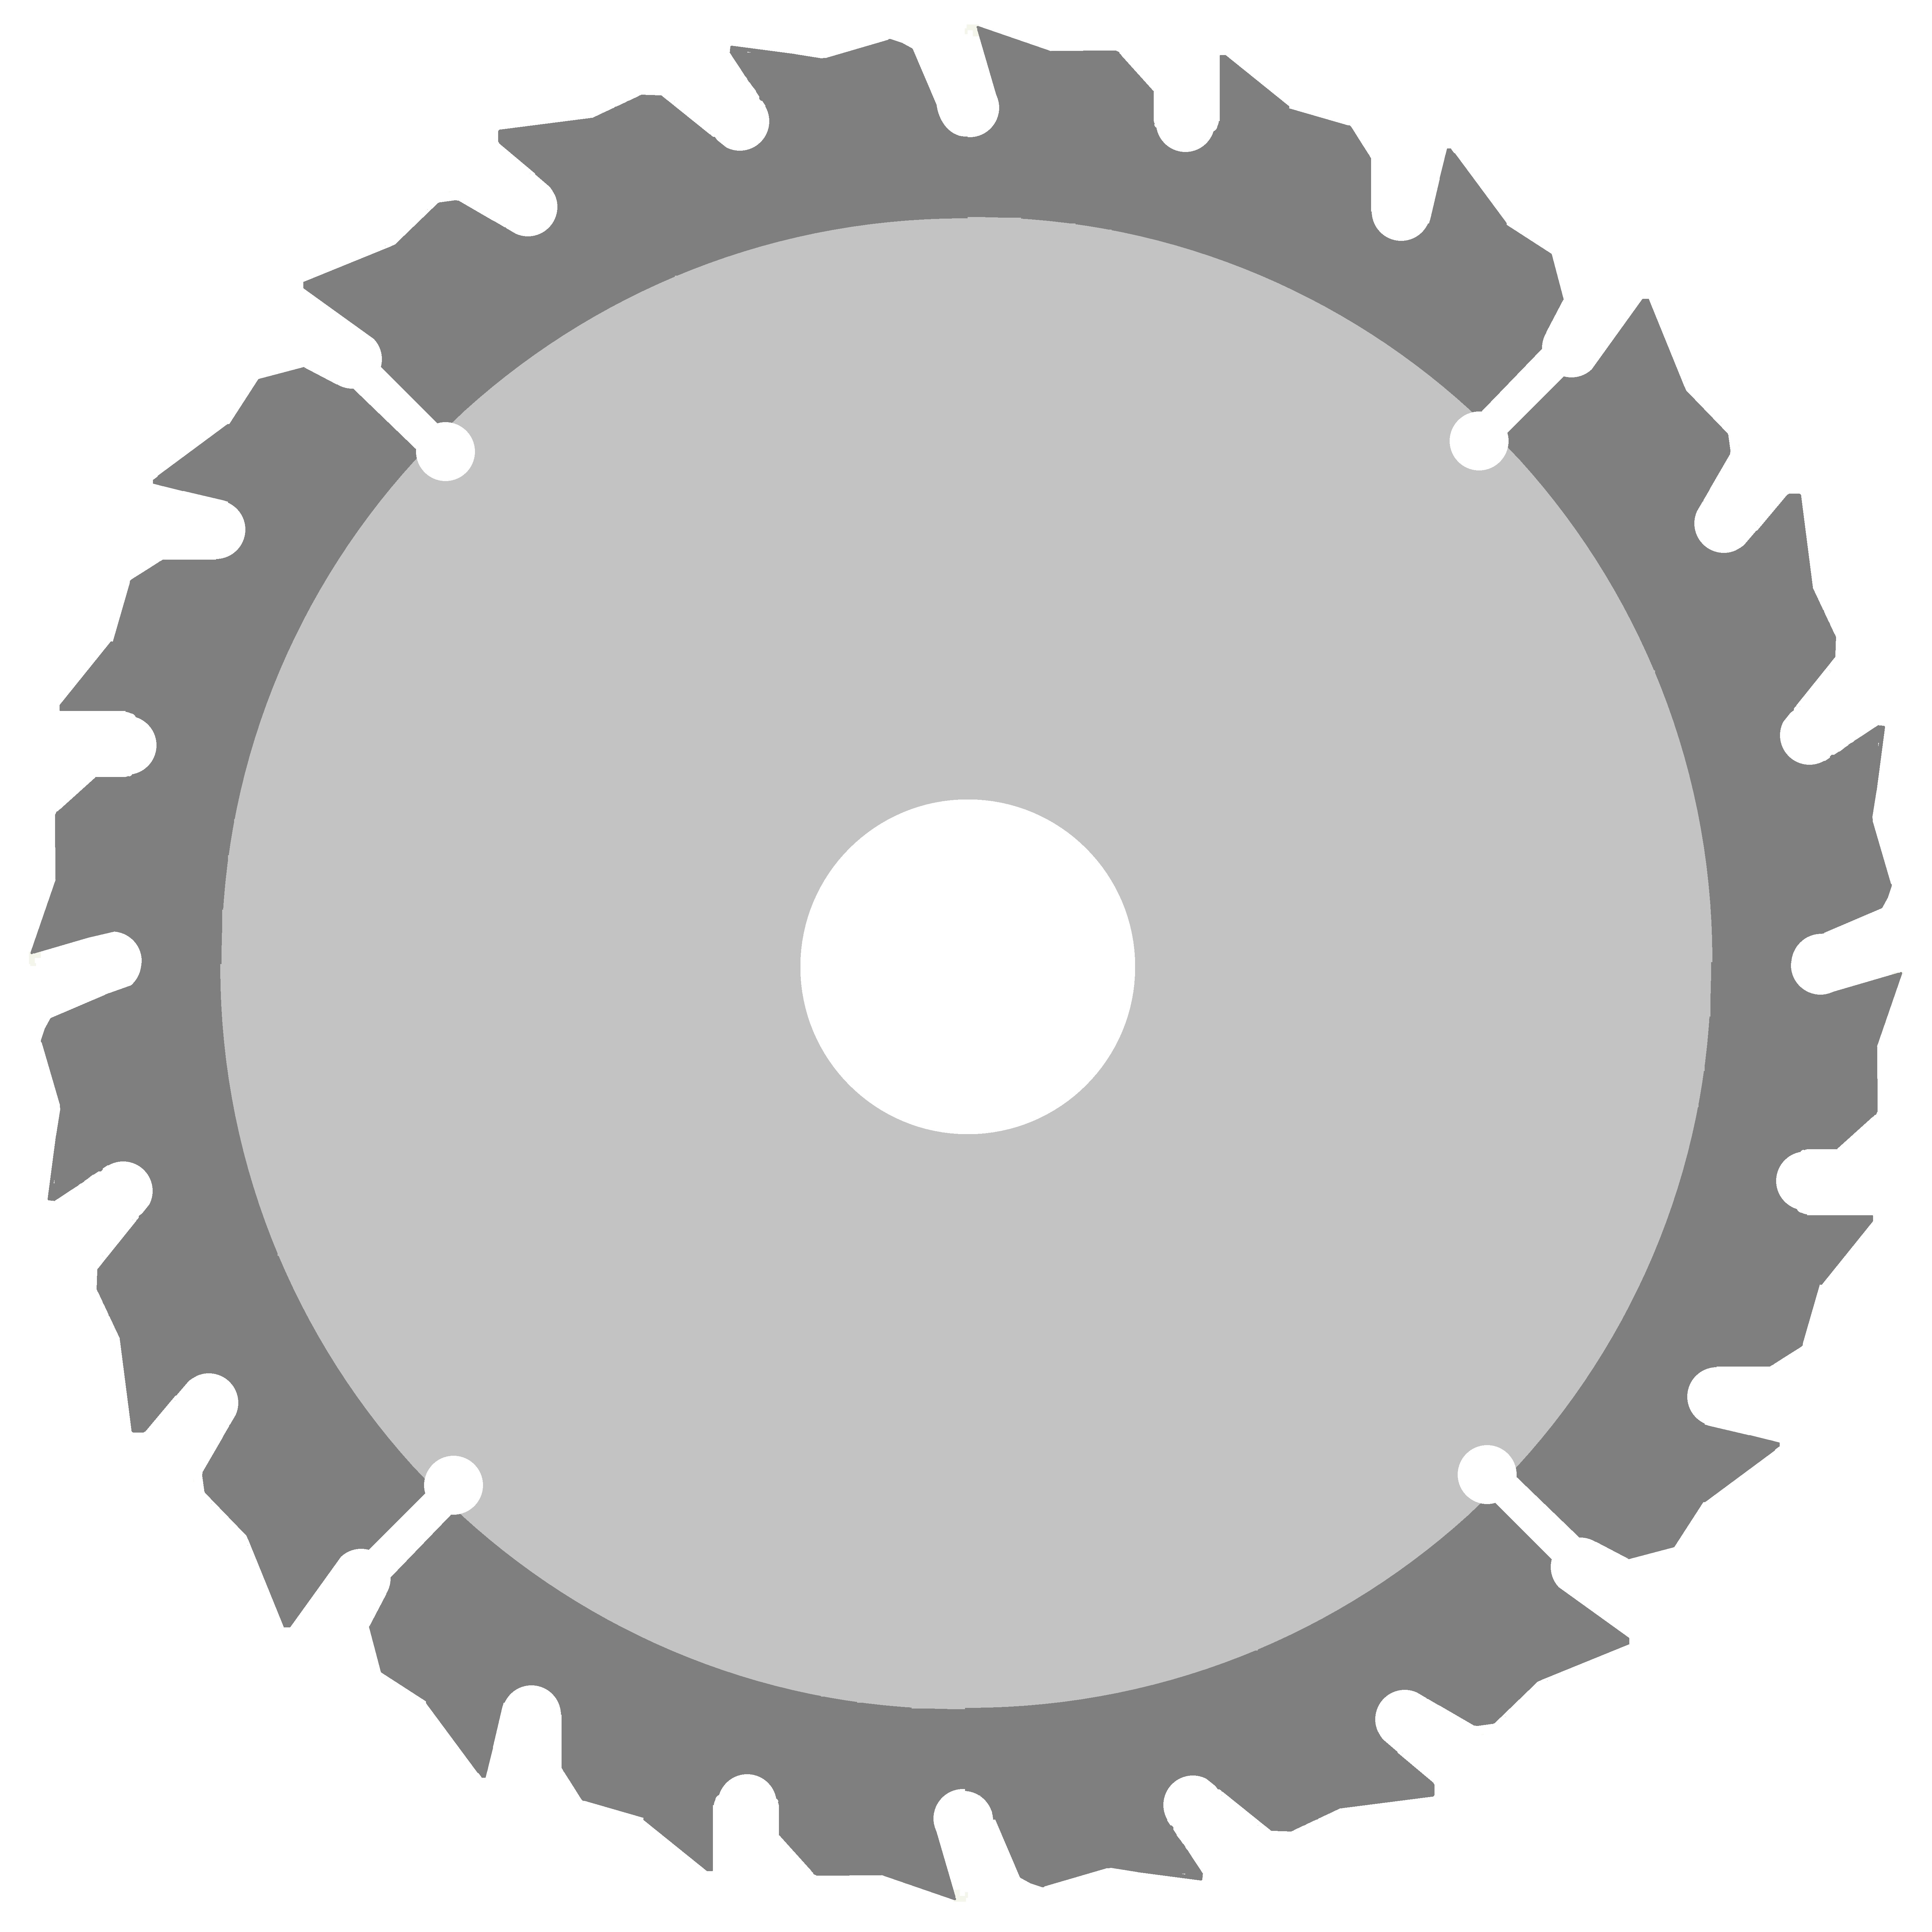 Saw blade cliparts.